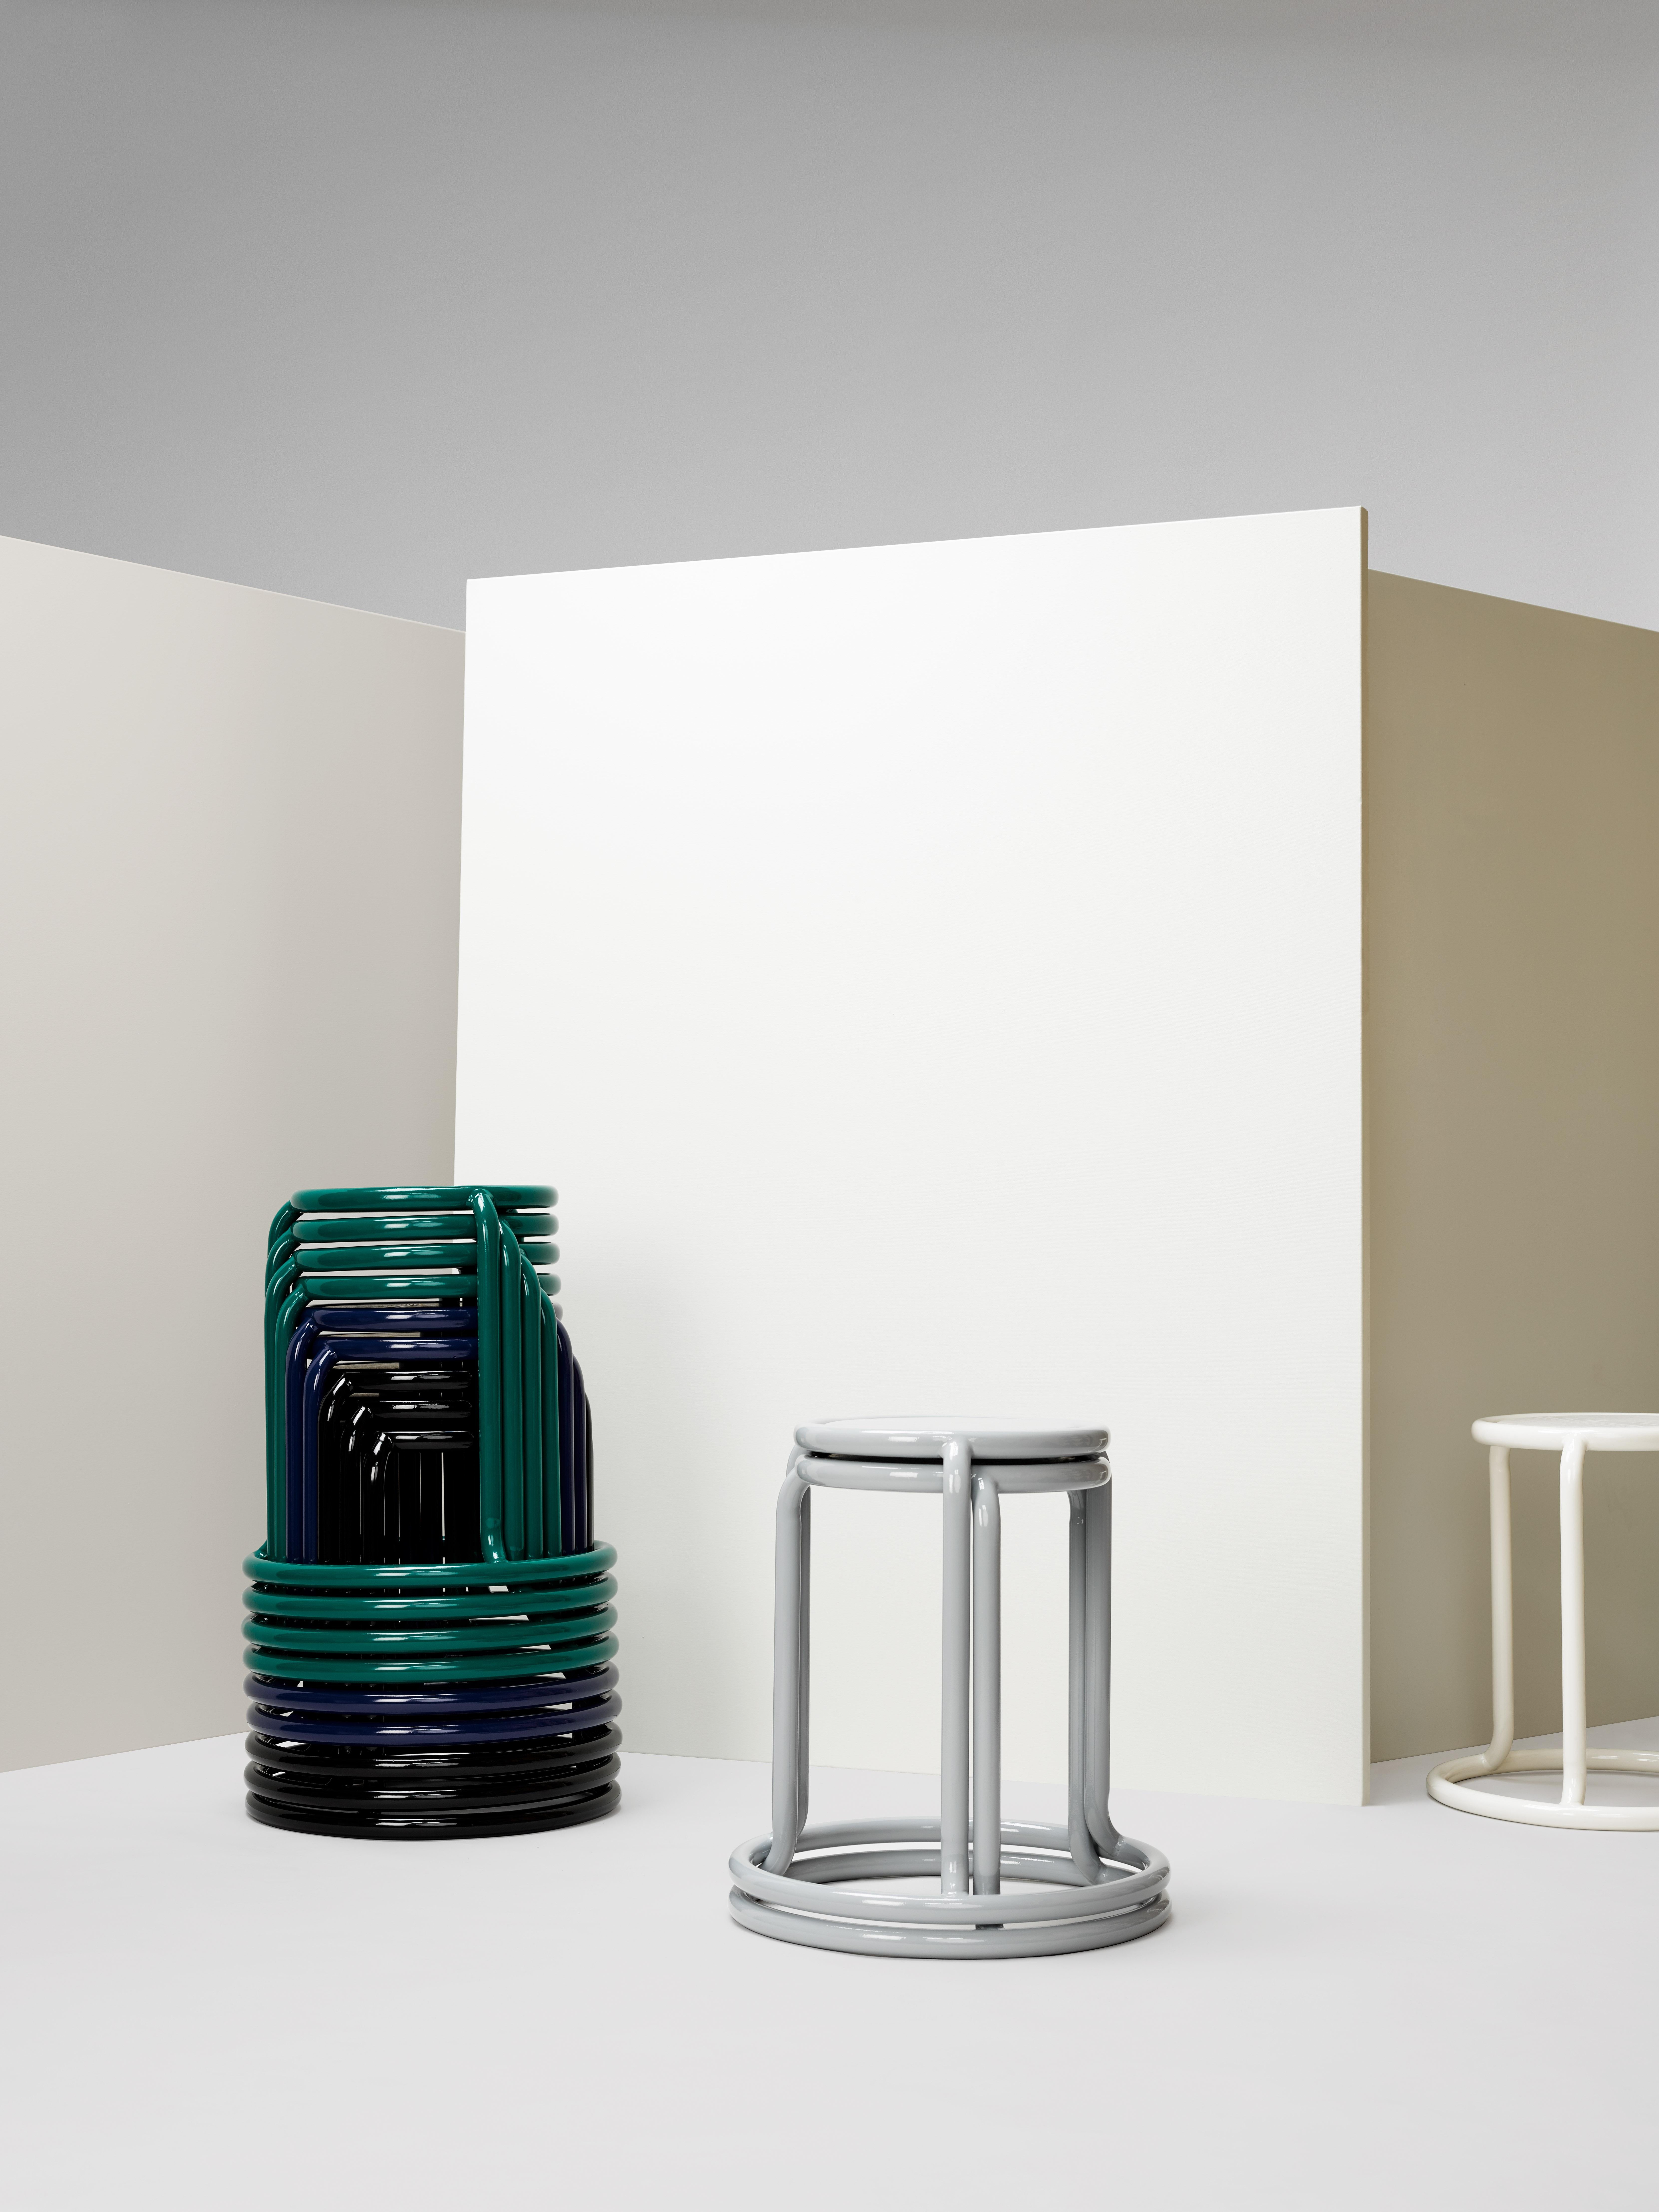 Champ is a reimagining of the utilitarian stackable stool. When stored, the stools form a graceful and graphic upward spiral. Taking cues from the original champ stool, the collection has grown to include a counter height stool, barstool and cafe